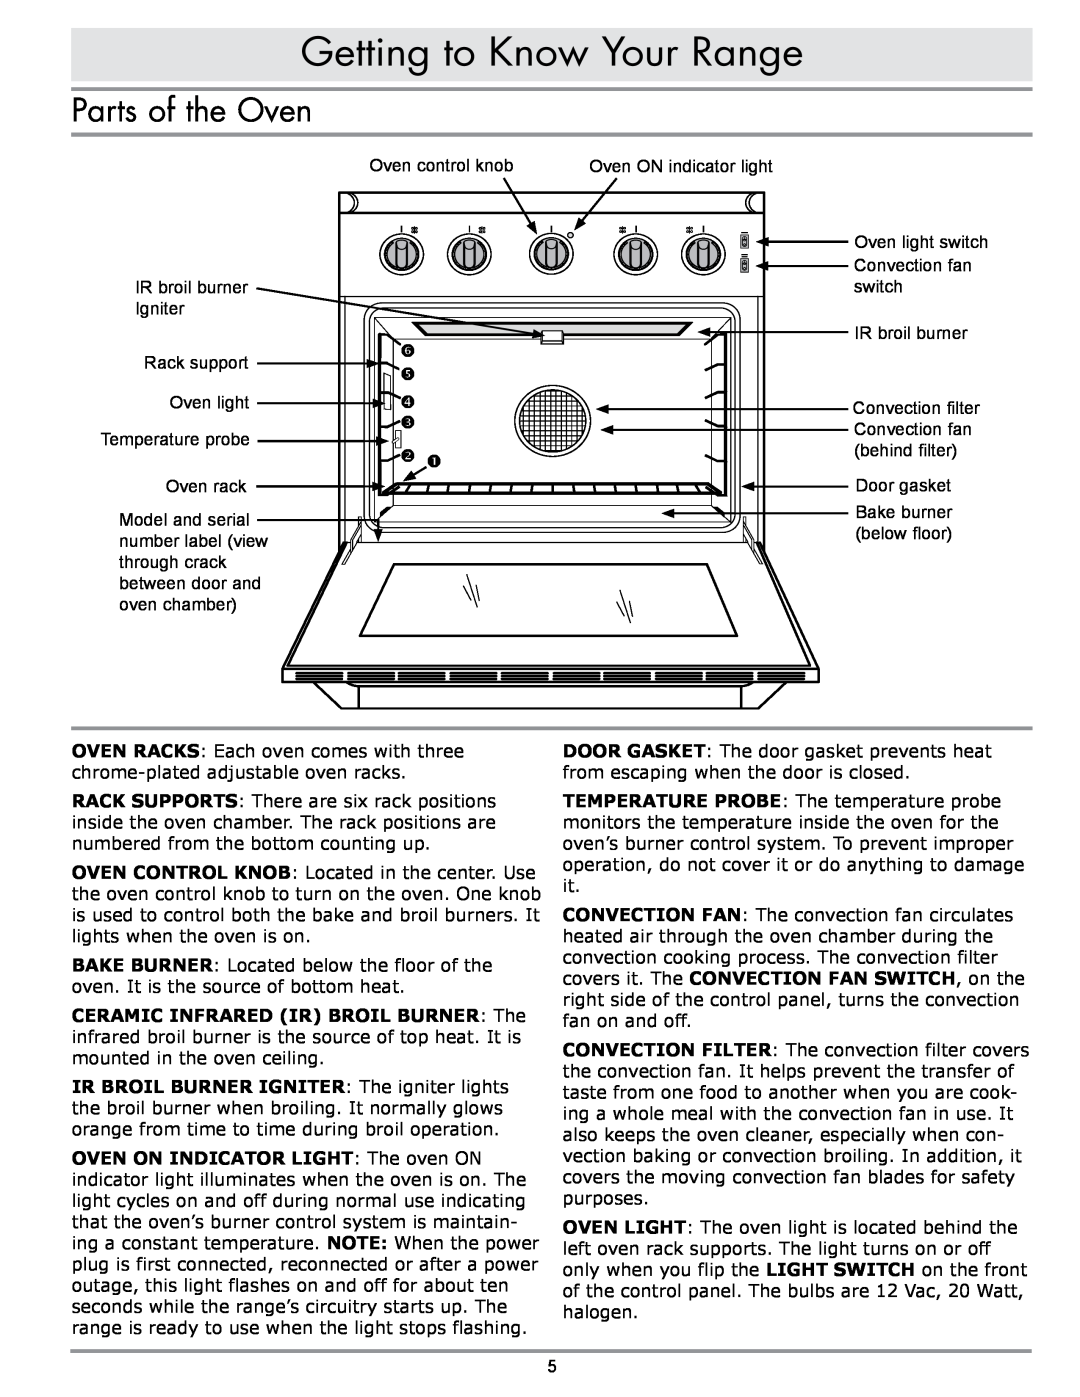 Sears ER30GI manual Parts of the Oven, Getting to Know Your Range 